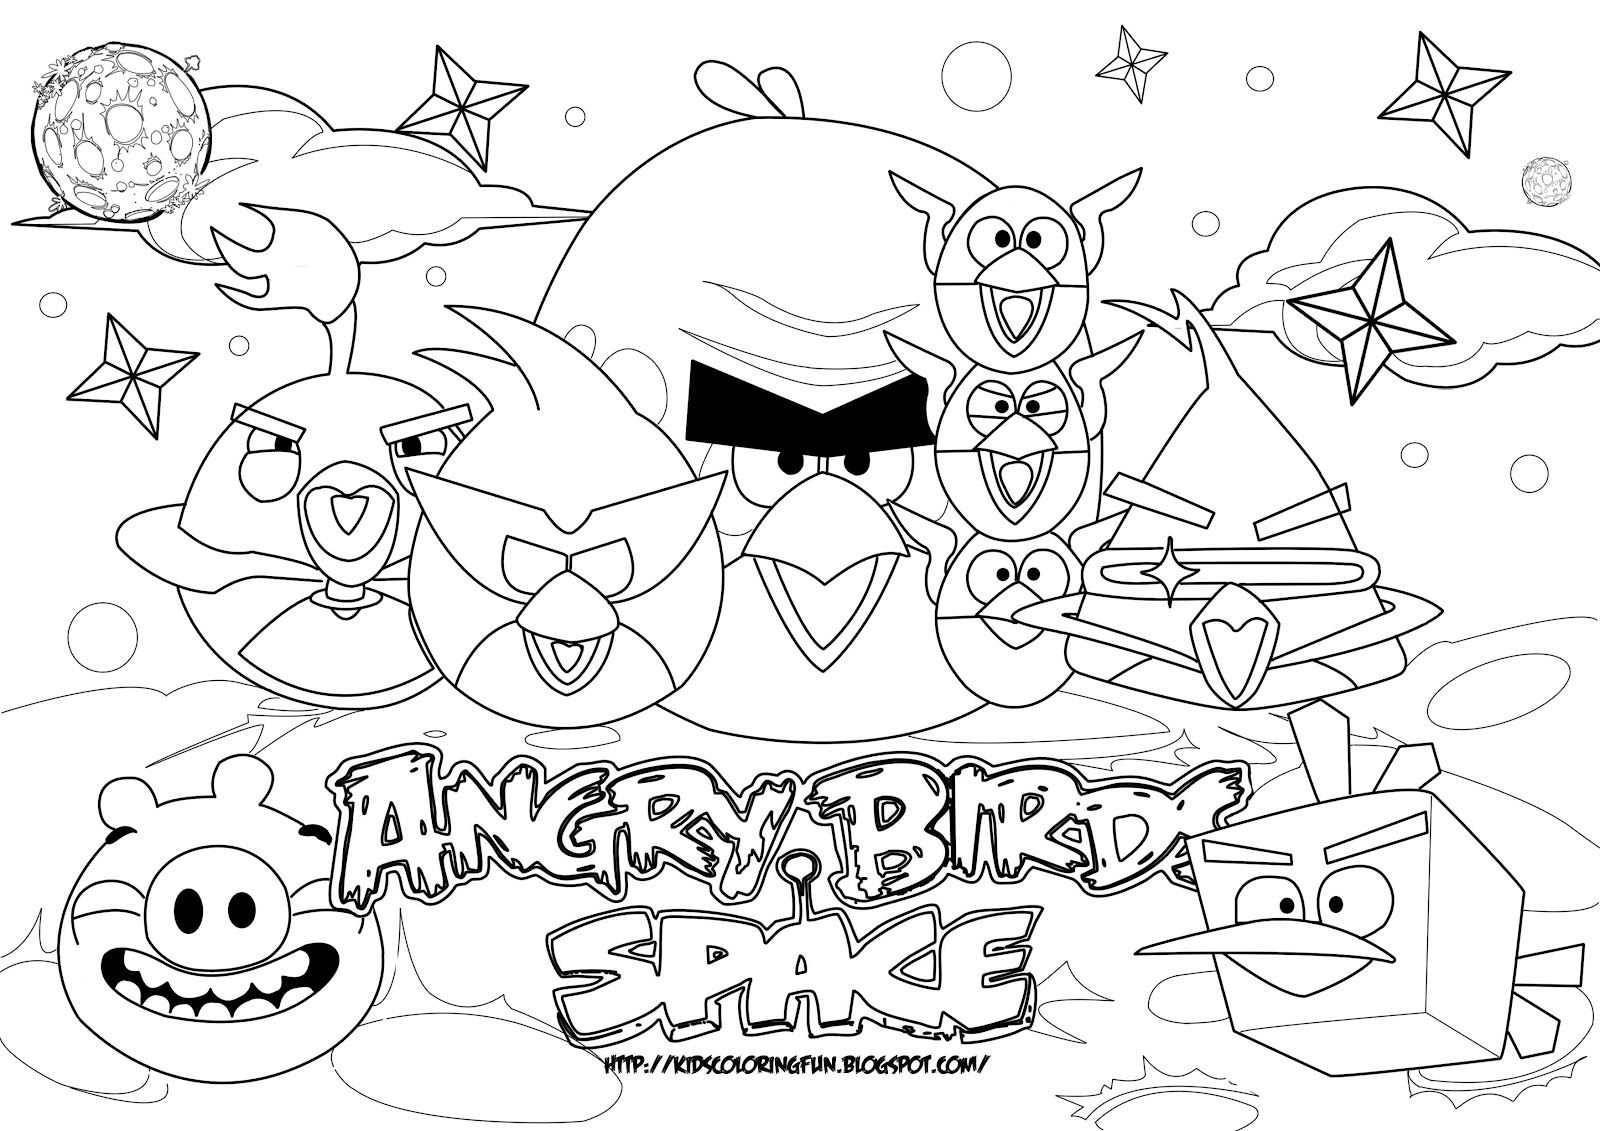 angry birds go coloring page